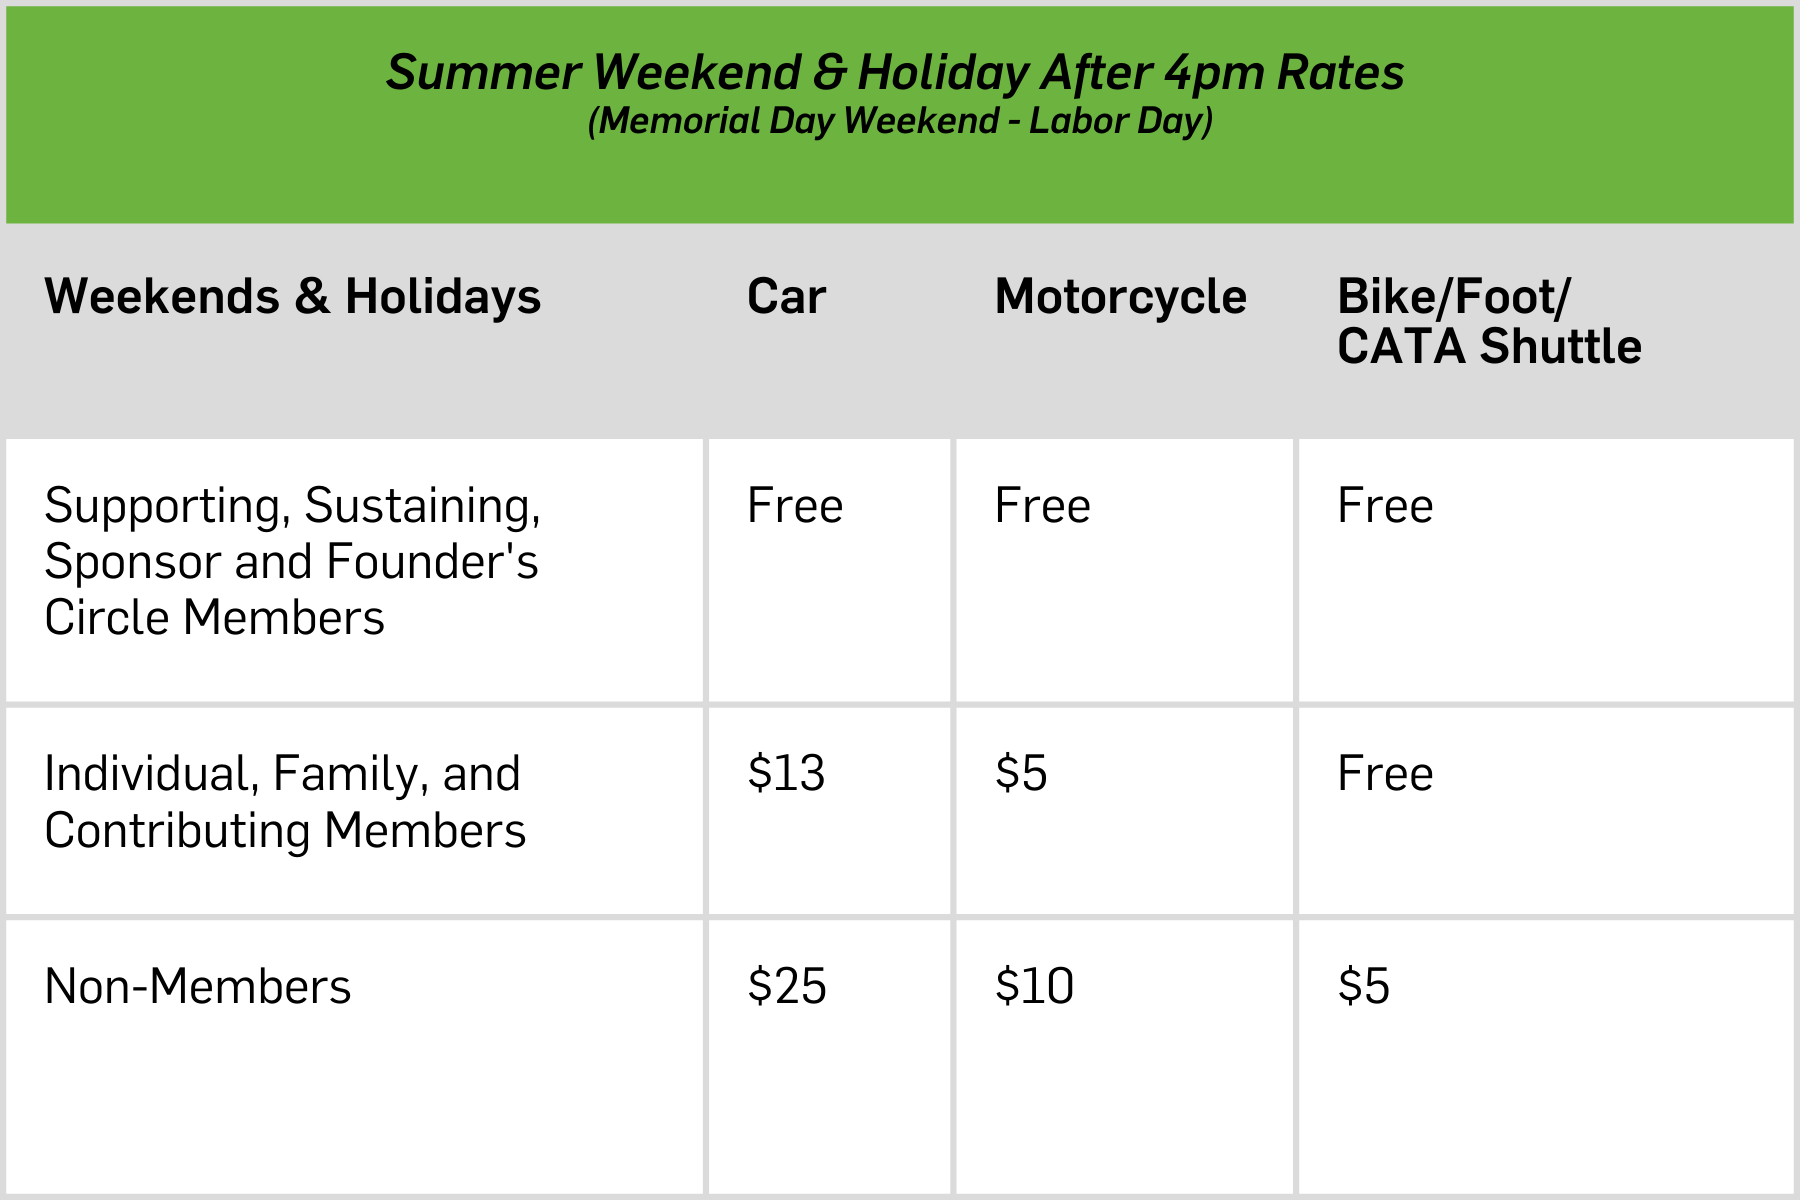 Image containing summer weekend and holiday rates for Crane Beach after 4 pm (Memorial Day Weekend - Labor Day): Supporting, Sustaining, Sponsor, and Founder's Circle Members arriving by car: free, arriving by motorcycle: free, arriving by bike/foot/CATA shuttle: free Individual, Family and Contributing Members arriving by car: $13, arriving by motorcycle: $5, arriving by bike/foot/CATA shuttle: free Nonmembers arriving by car: $25, arriving by motorcycle: $10, arriving by bike/foot/CATA shuttle: $5